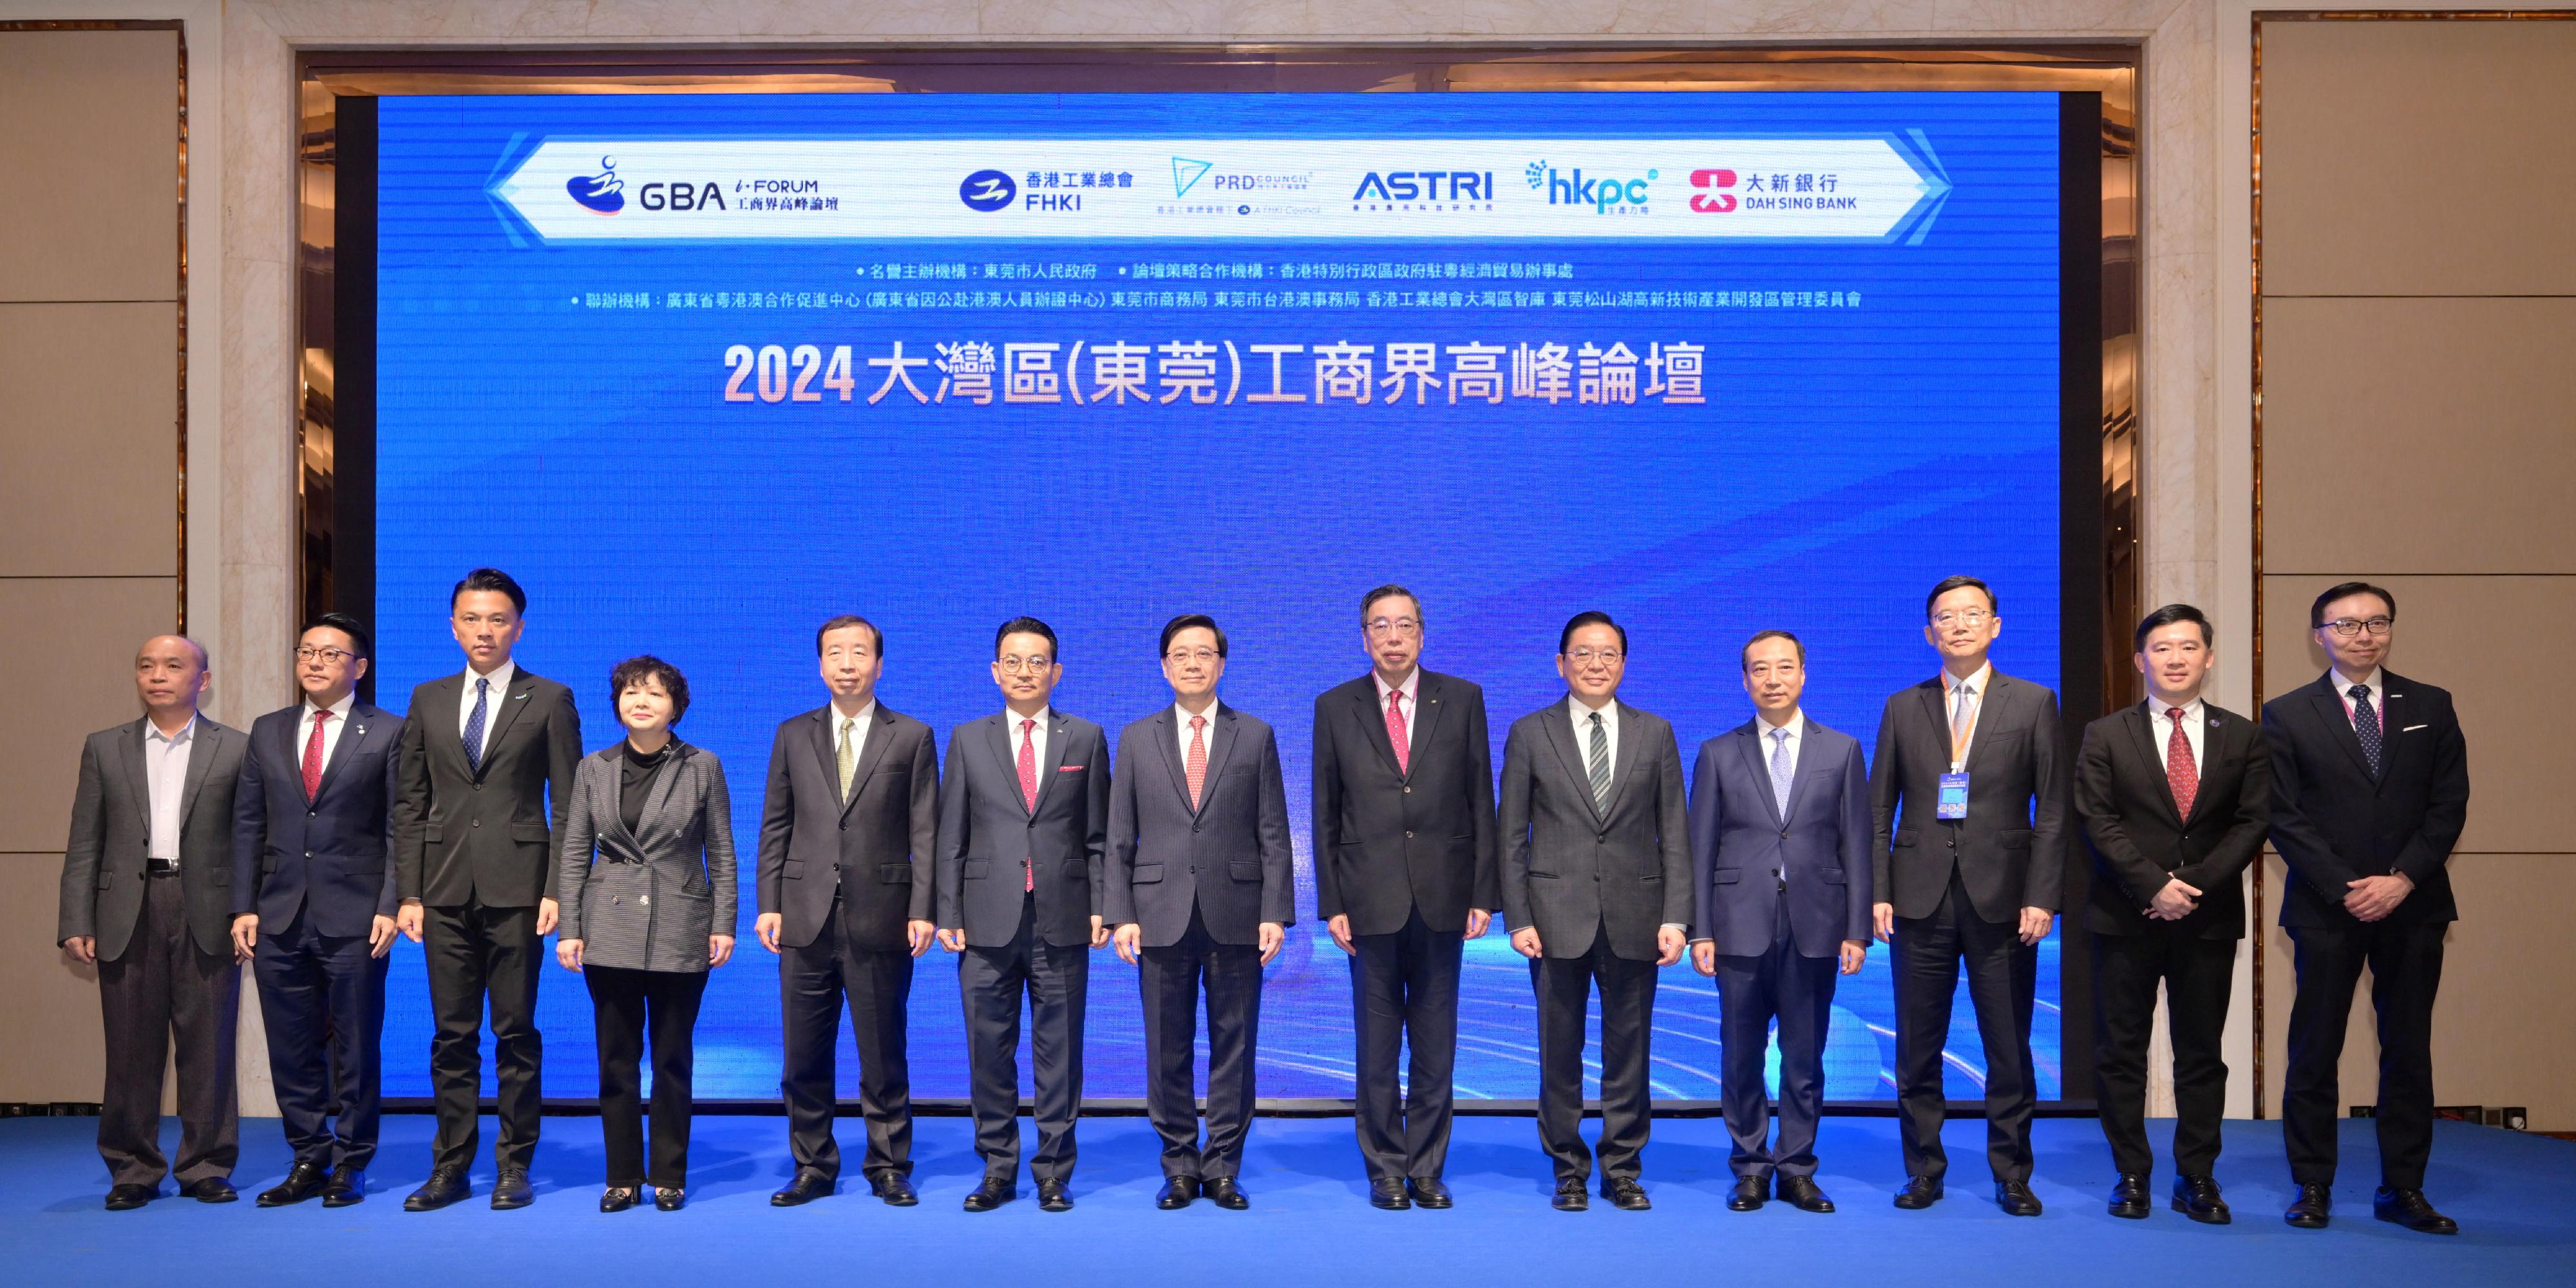 The Chief Executive, Mr John Lee, attended the 2024 GBA iForum hosted by the Federation of Hong Kong Industries in Dongguan today (January 4). Photo shows (from fourth left) the Director General of the Hong Kong and Macao Affairs Office of the People's Government of Guangdong Province, Ms Li Huanchun; the Vice-Chairman of the Standing Committee of the Guangdong Provincial People's Congress and the Secretary of the CPC Dongguan Municipal Committee, Mr Xiao Yafei; the Chairman of the Federation of Hong Kong Industries, Mr Steve Chuang; Mr Lee; the President of the Legislative Council, Mr Andrew Leung; Legislative Council Member Mr Jeffrey Lam; Deputy Secretary of the CPC Dongguan Municipal Committee and the Mayor of the Dongguan Municipal Government, Mr Lyu Chengxi; and other guests at the forum.
